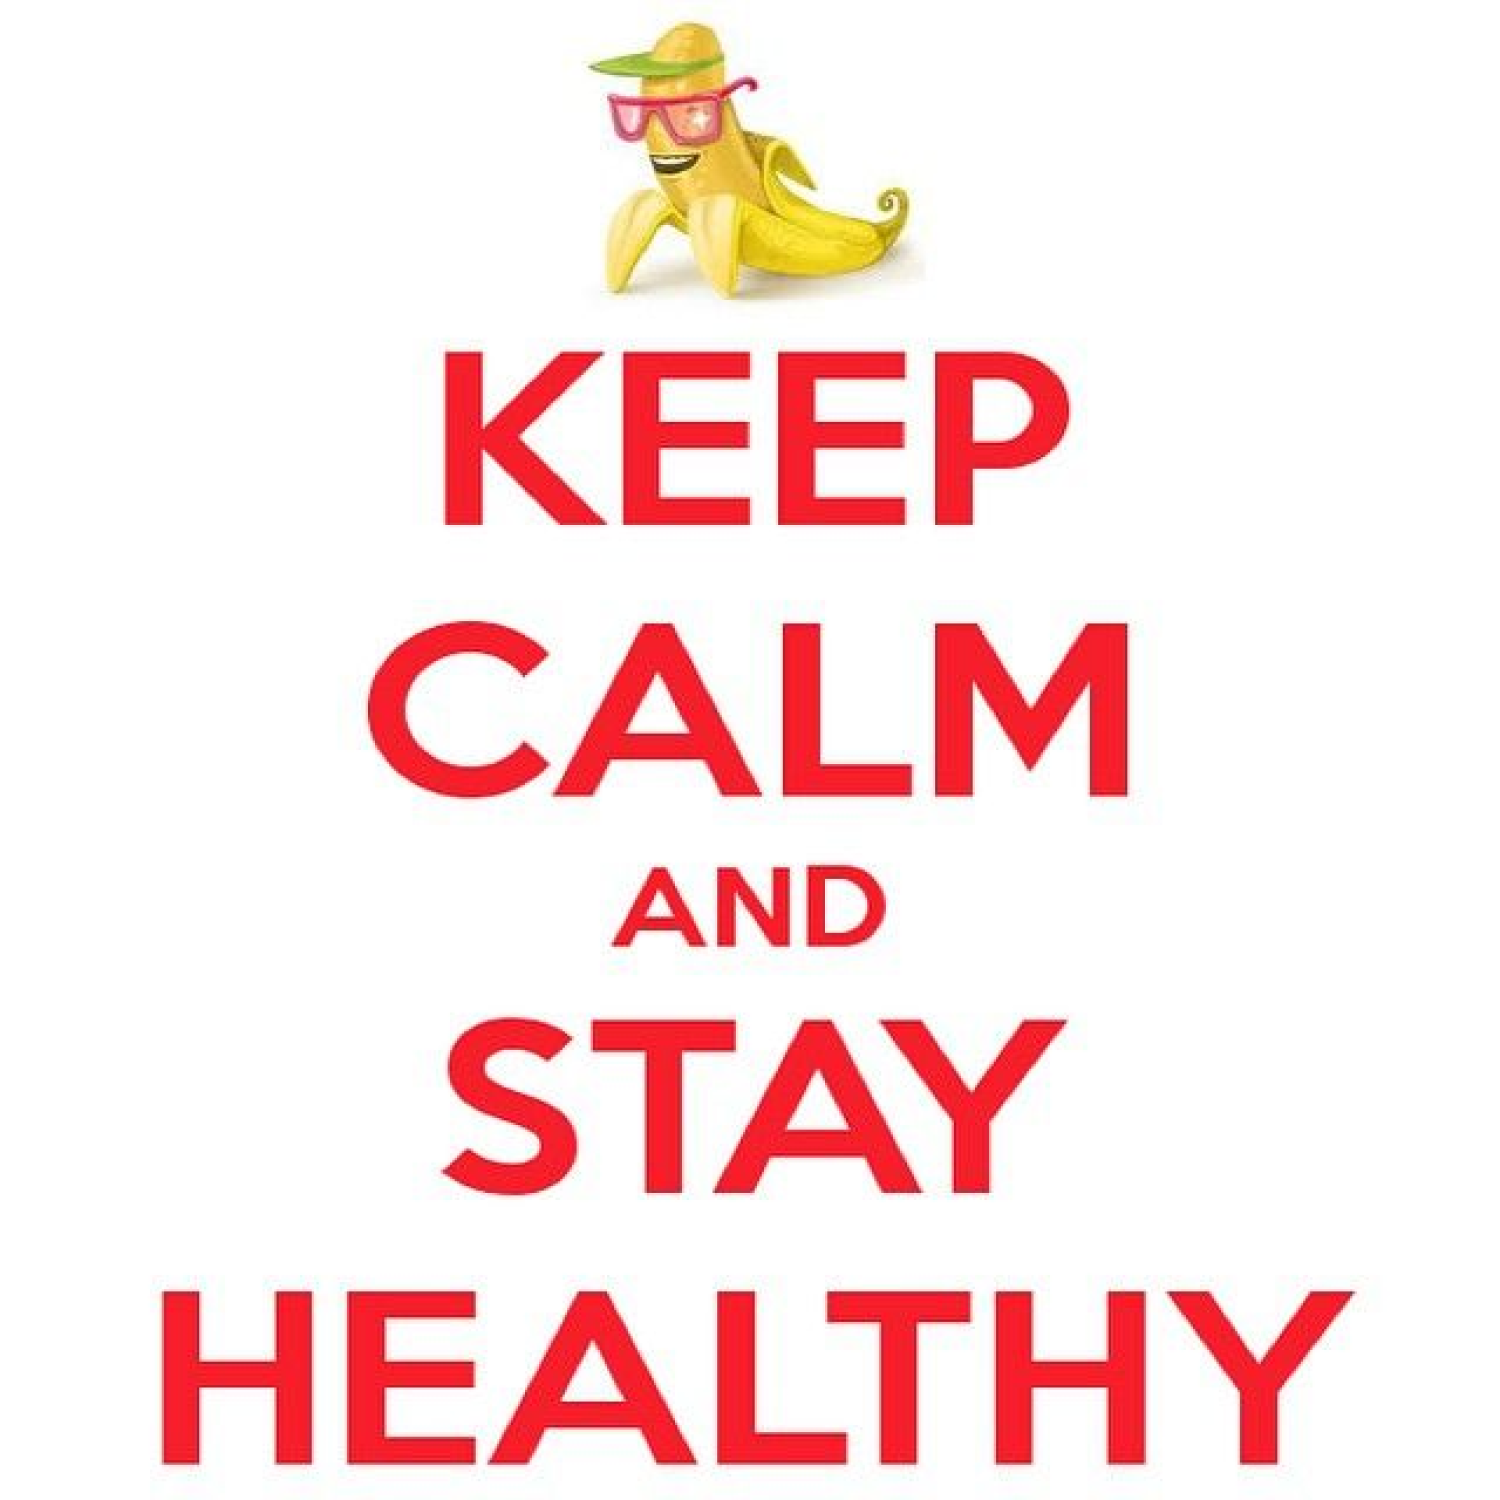 Keep Calm and Stay Healthy